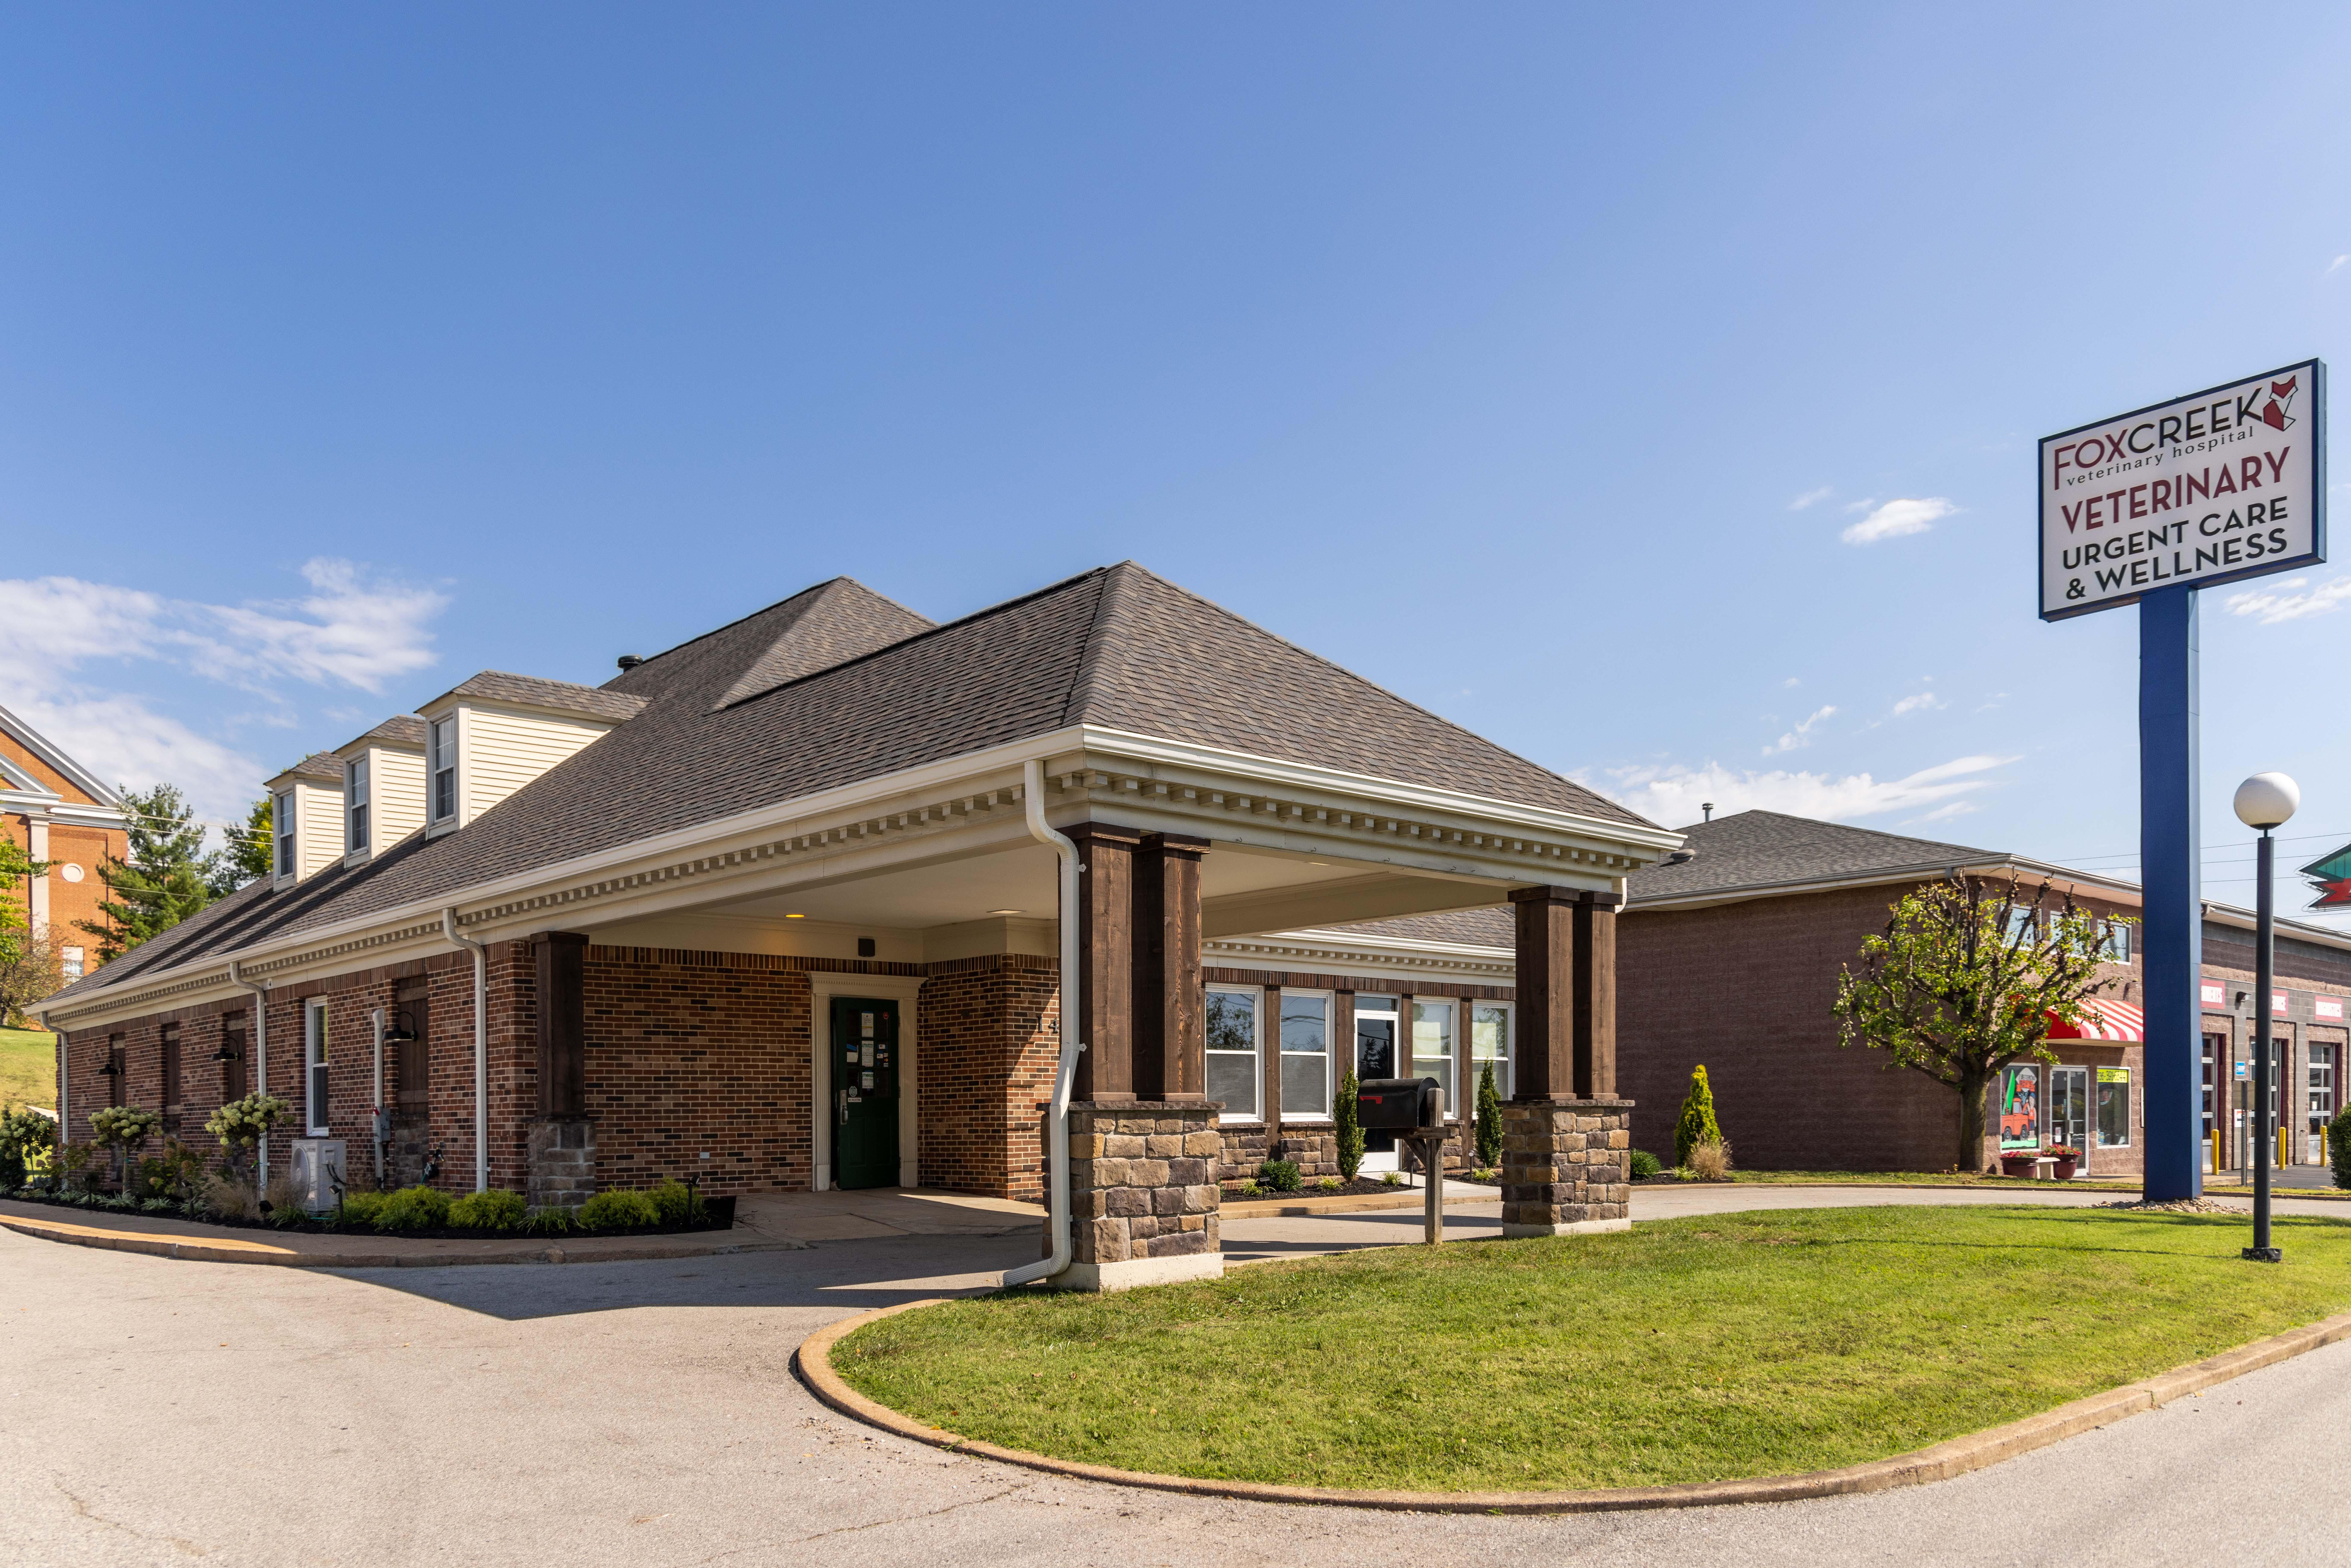 Welcome to Fox Creek Veterinary Hospital located at 14309 Manchester Avenue in Manchester, MO. We opened our door in September of 2022, and we cannot wait to serve the companion animals of our community!